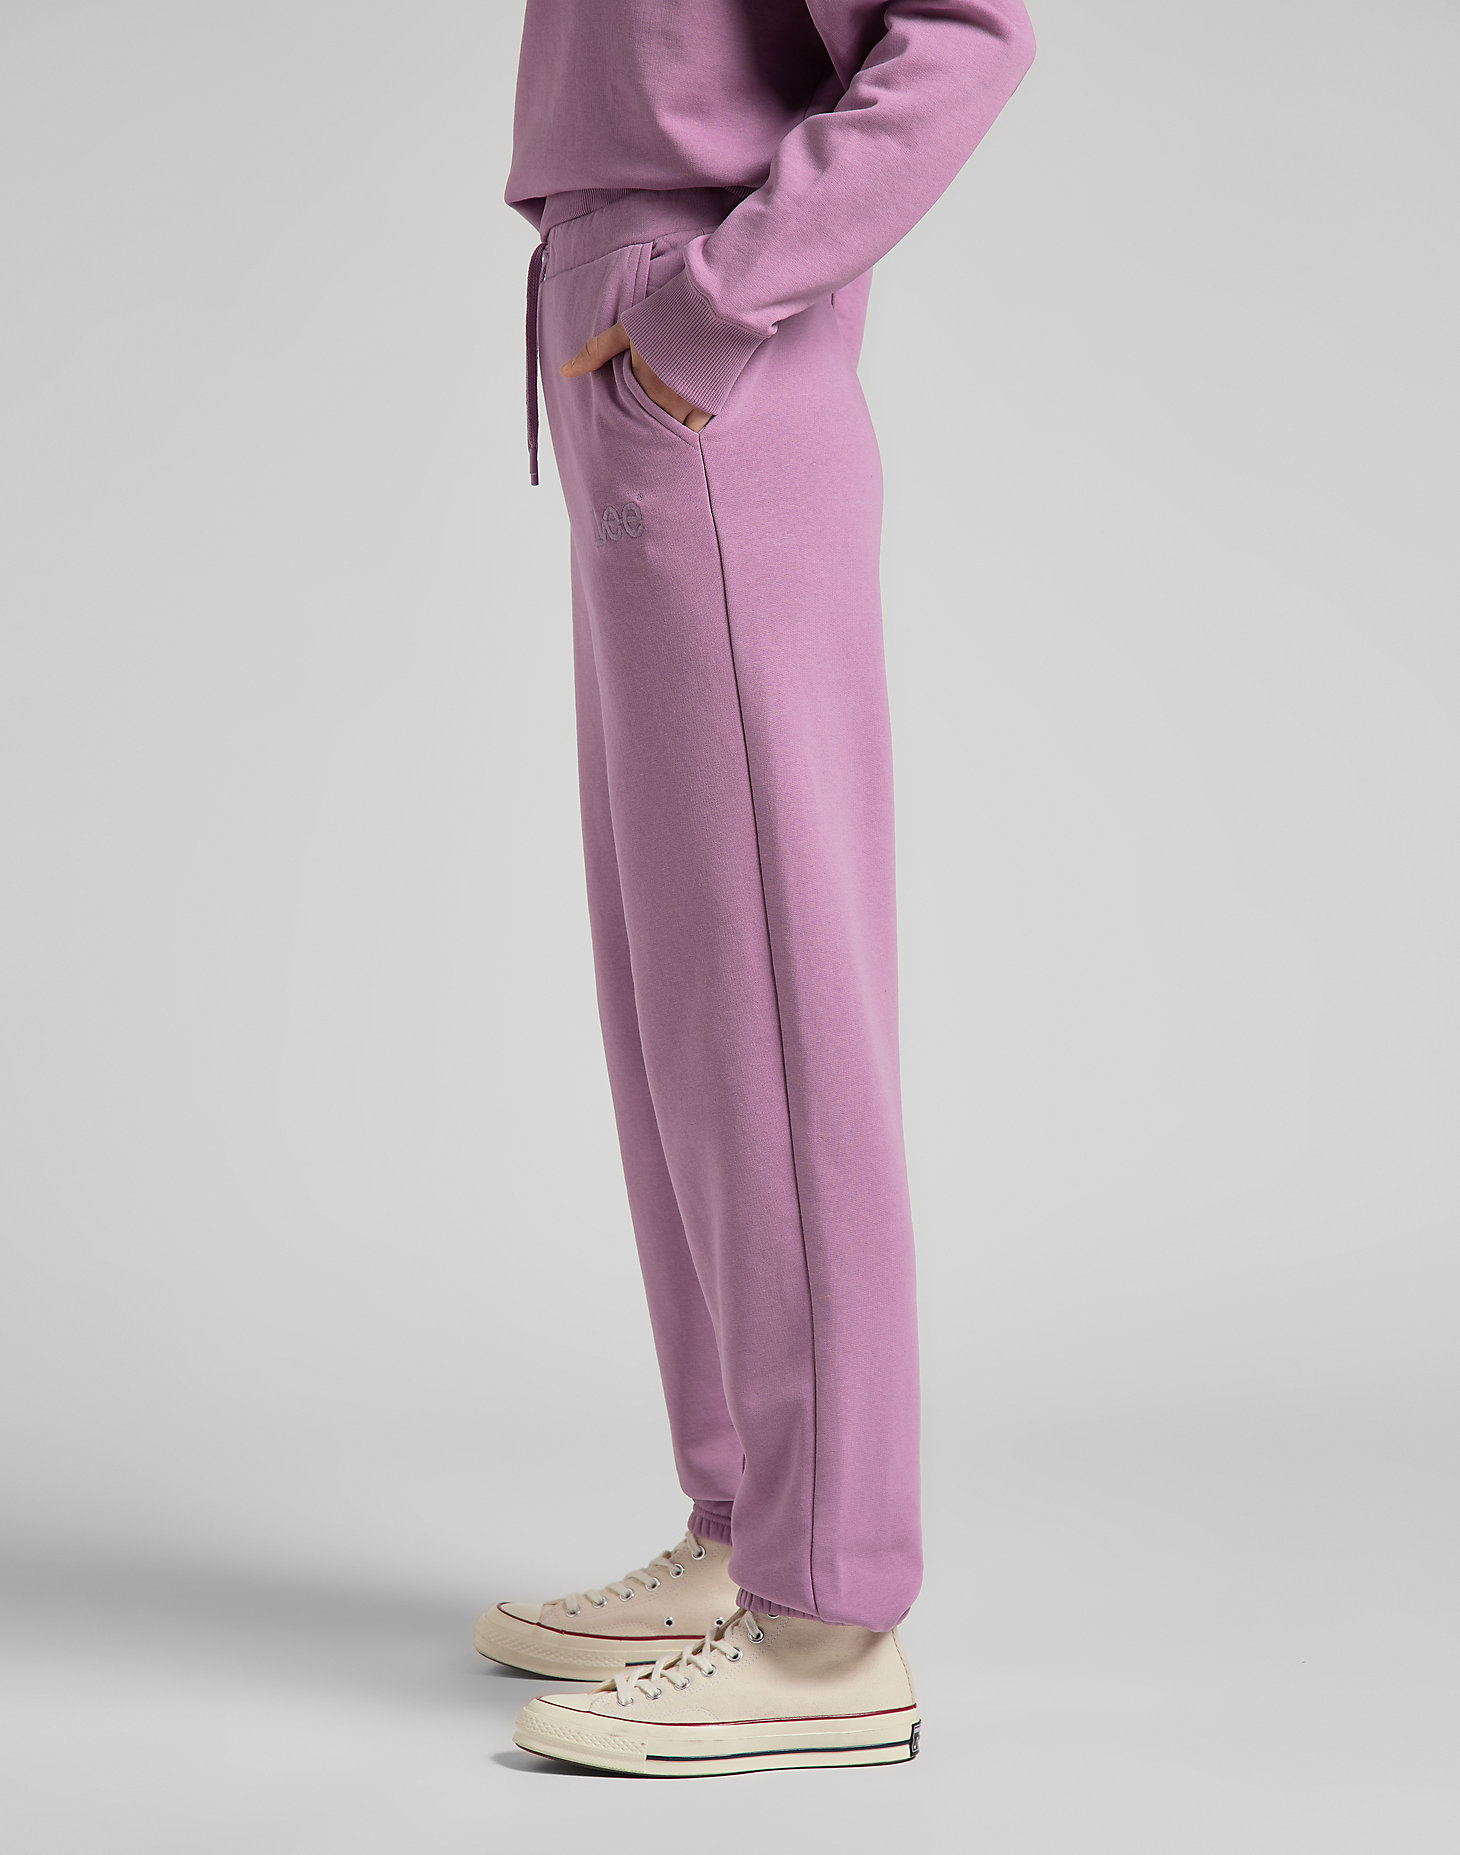 Relaxed Sweatpants in Plum alternative view 4